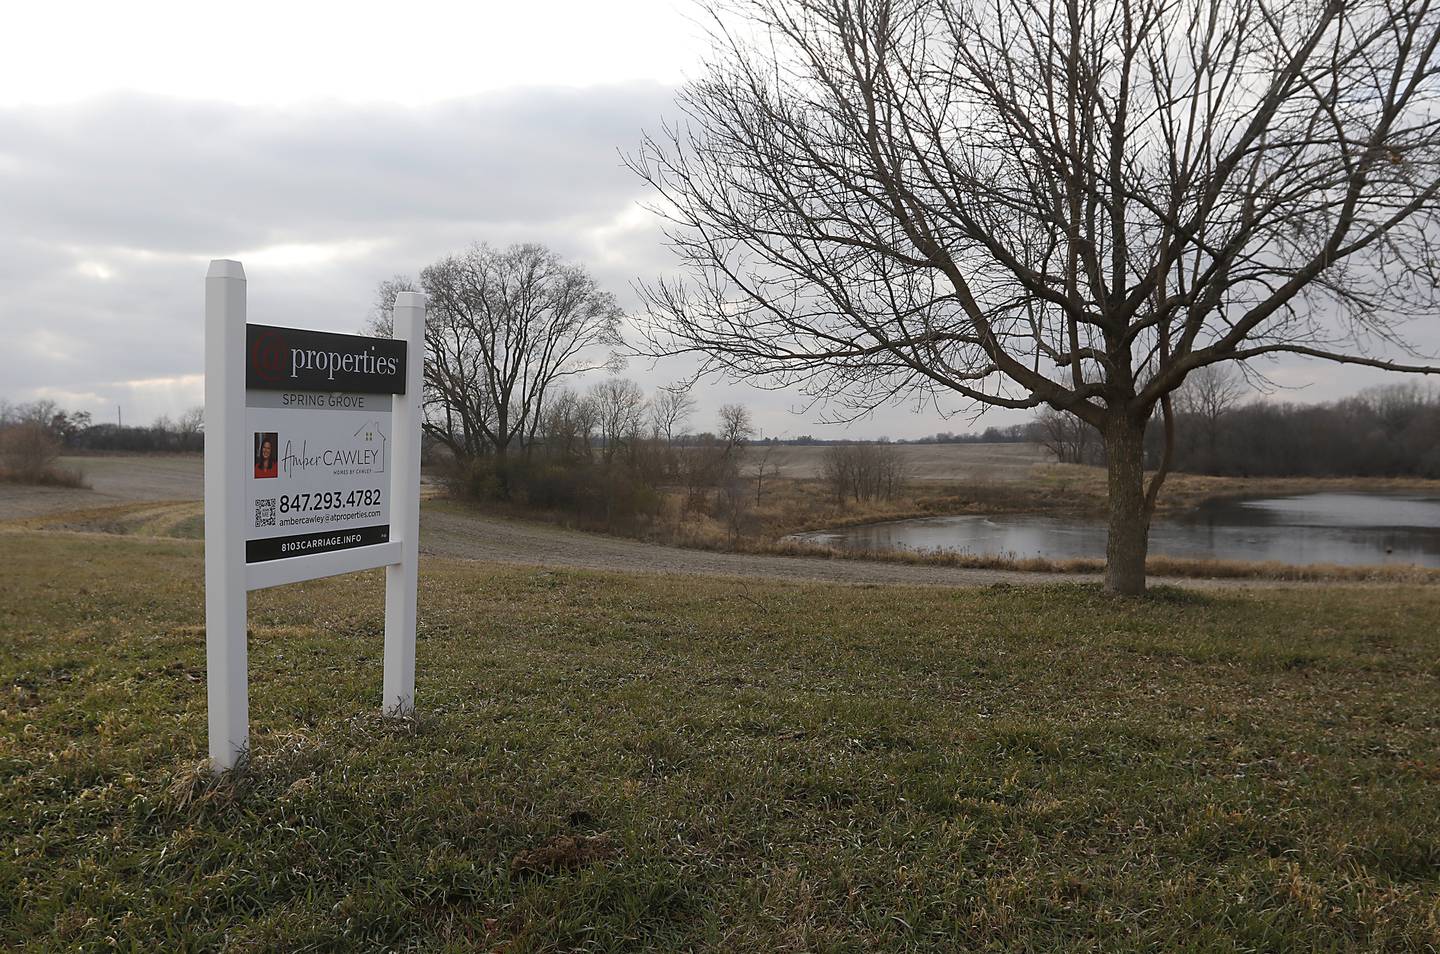 Property for sale near a farm field on Monday, Nov. 28, 2022, in Spring Grove. The farm was purchased by Super Aggregates to develop into a gravel pit, an idea opposed by nearby residents.